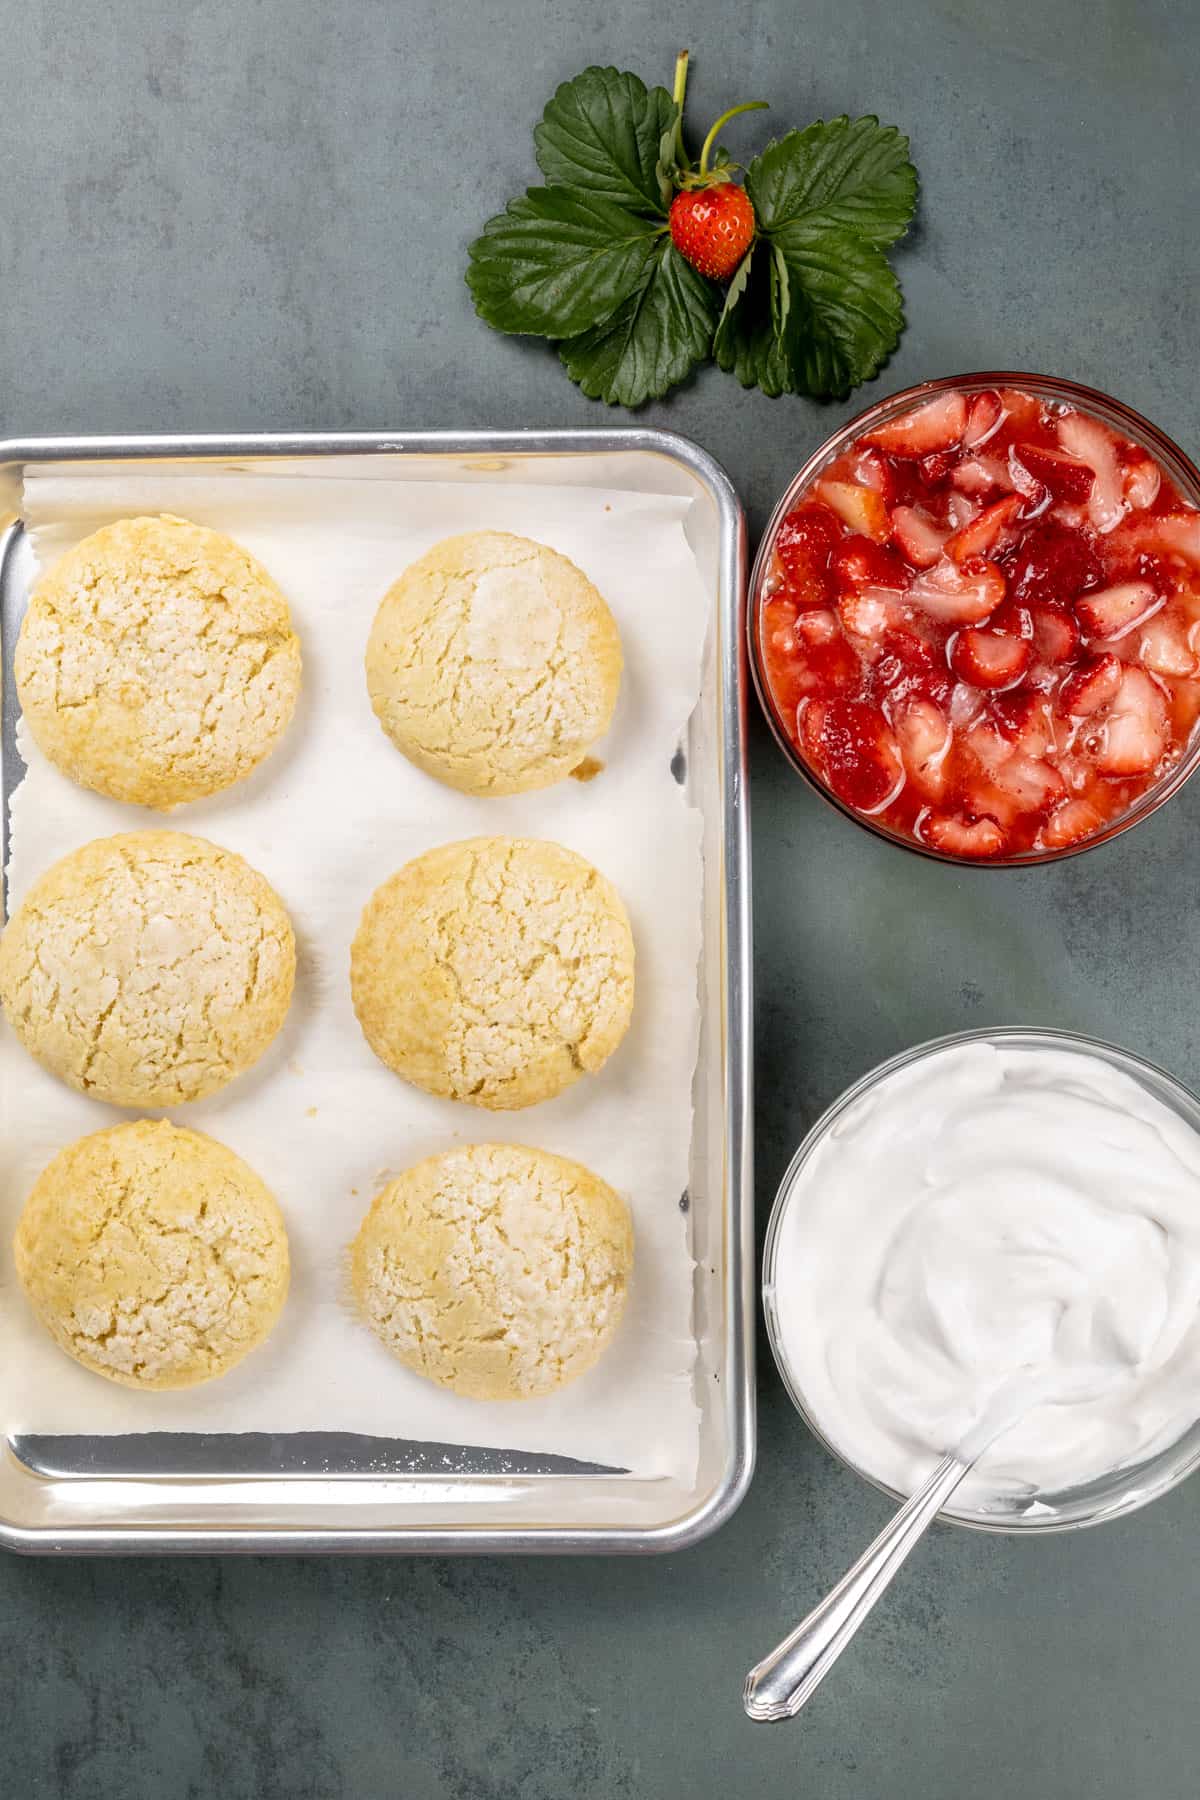 A tray filled with the cooked and cooled shortcakes, a bowl filled with the strawberries, and a bowl filled with dairy free whipped cream on a countertop.